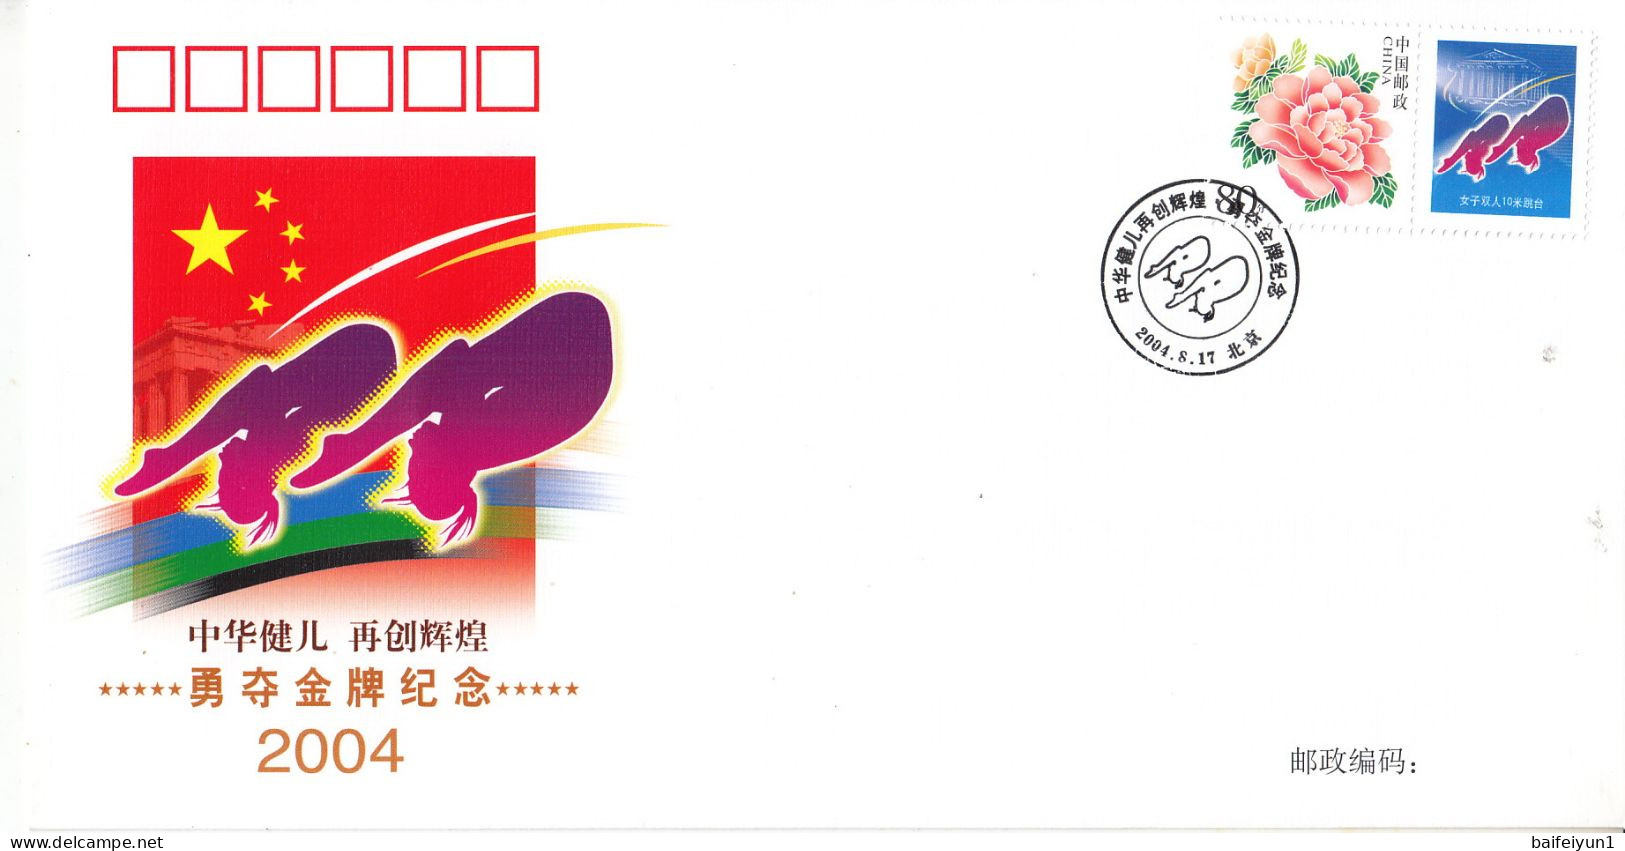 CHINA 2004 PFTN-39(10) Athens Olympic Games Gold Medal In The World  Women's Synchronized10m Platform Diving Event Cover - Diving